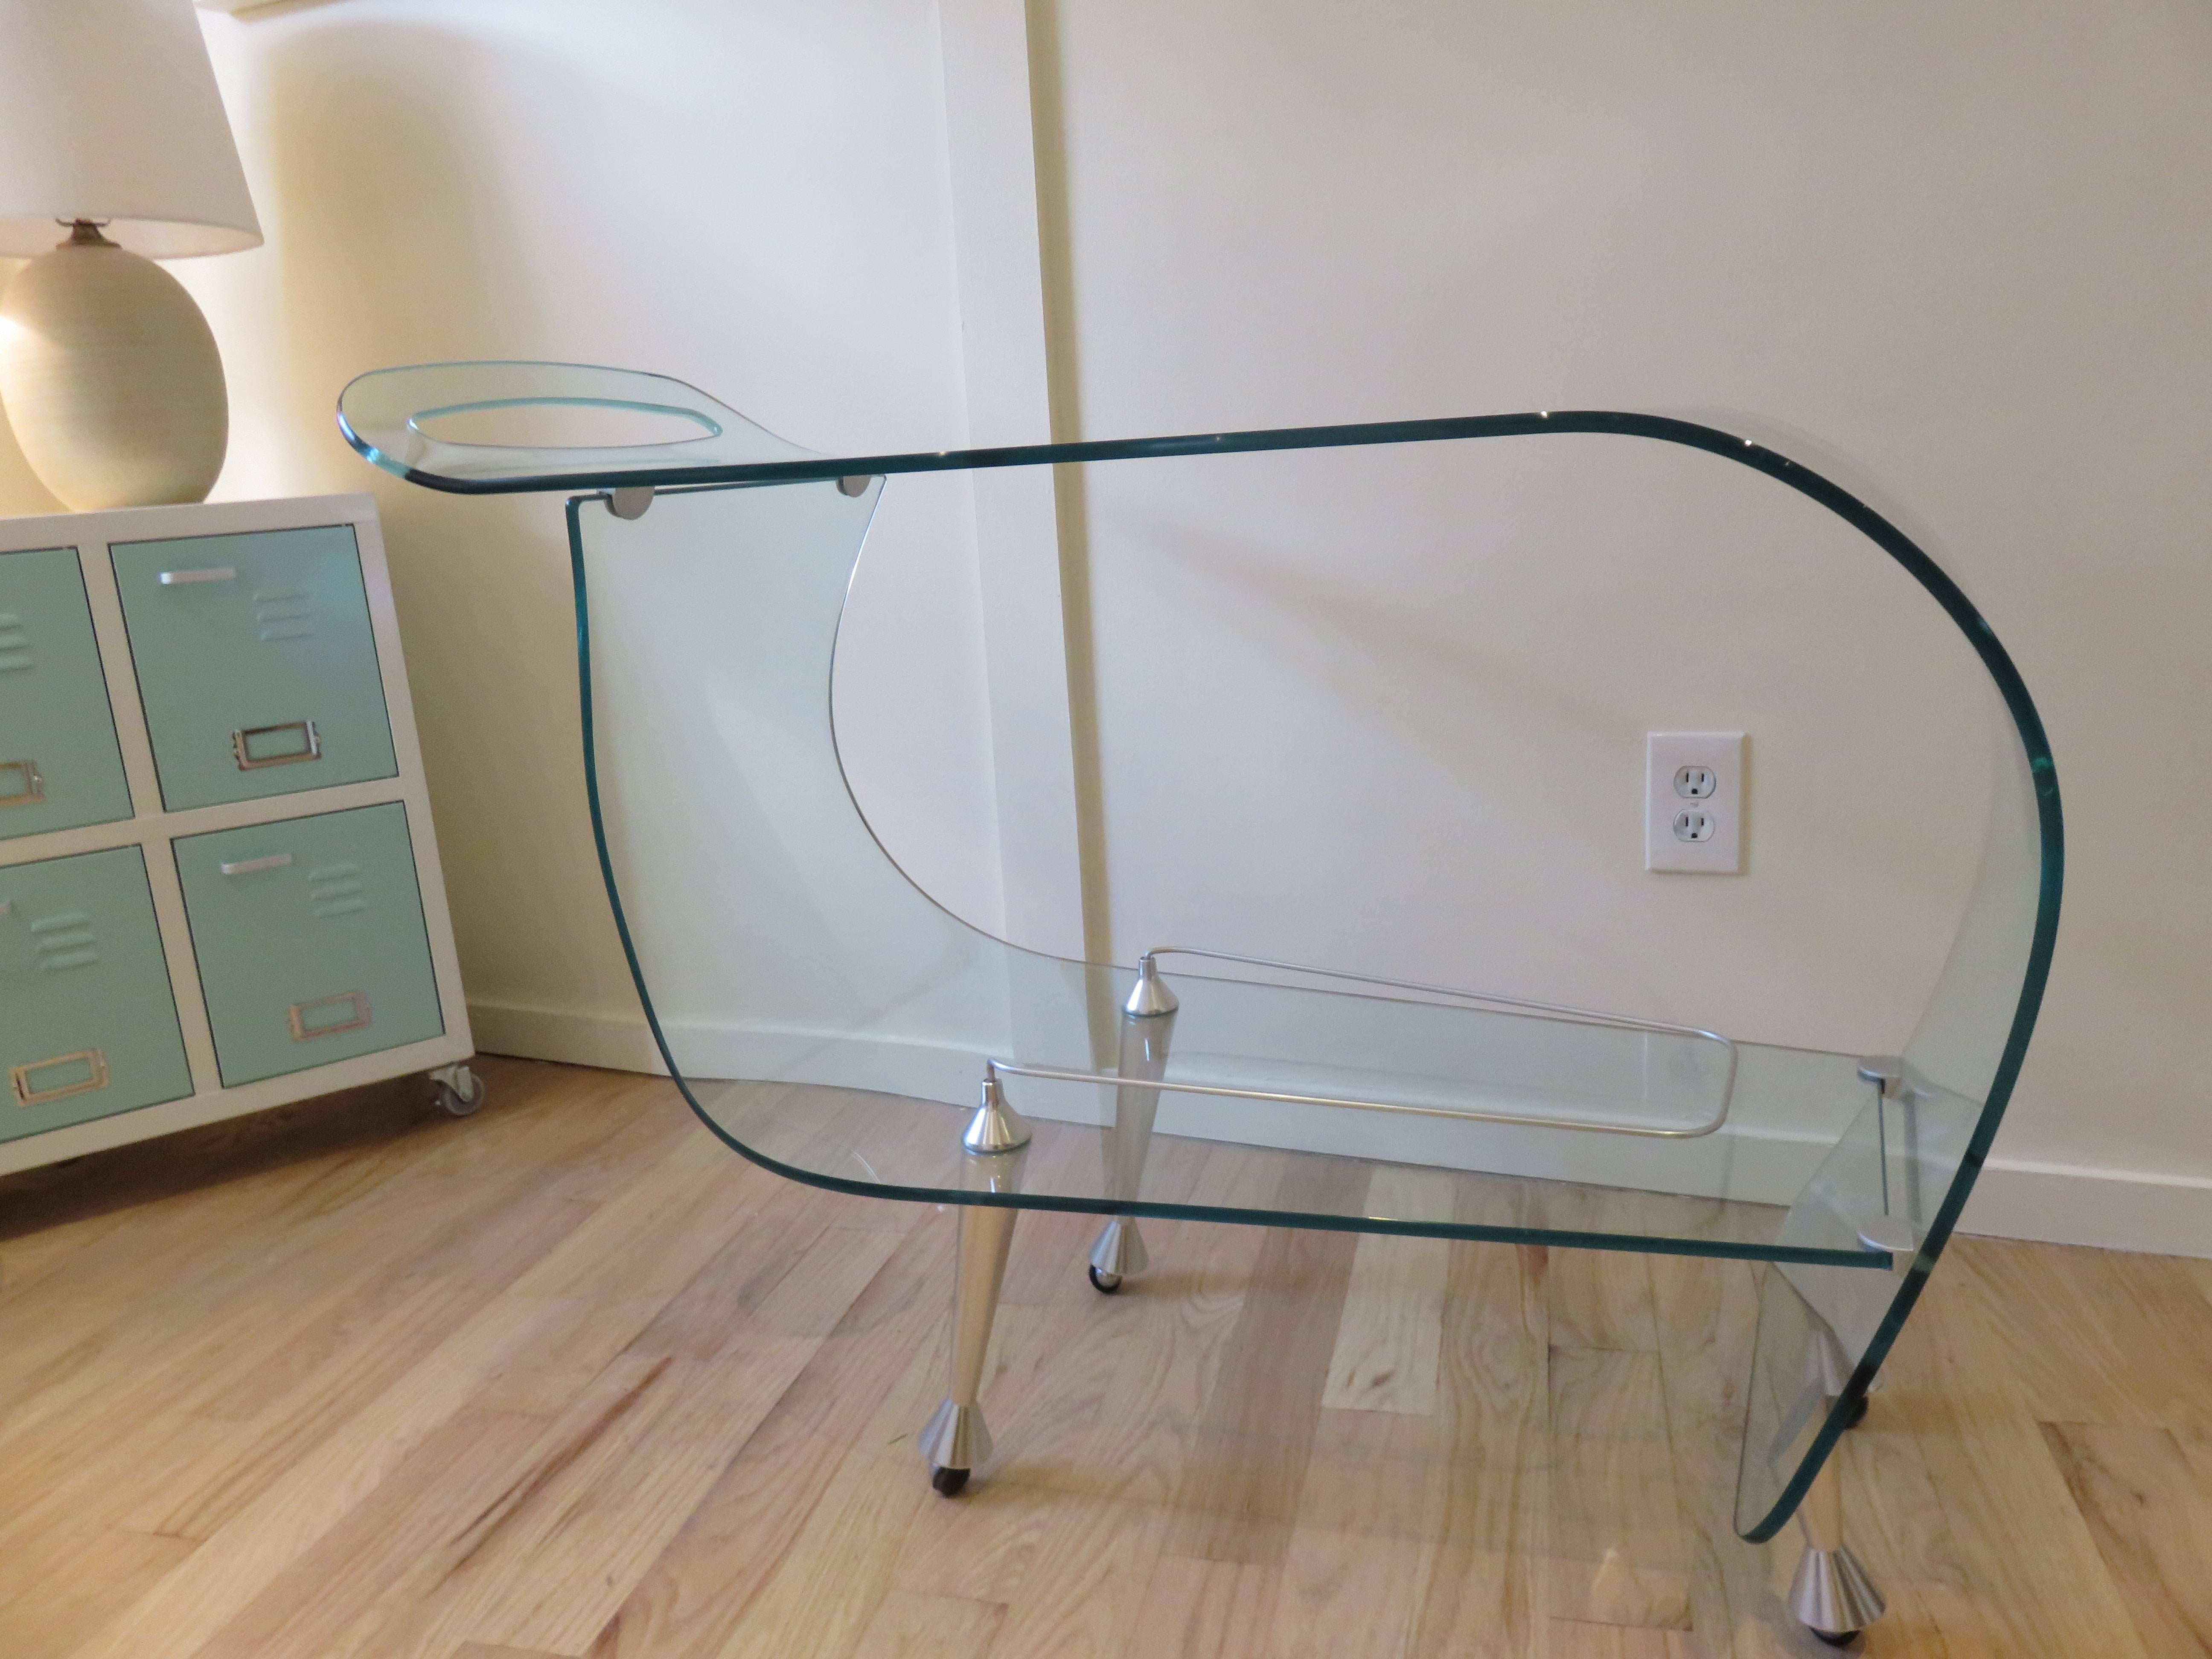 From the ghost collection a Fiam Italia glass bar cart/trolley sleek modern and fabulous in design,hand and industrial made.Brushed steel feet on casters.
Immaculate condition.